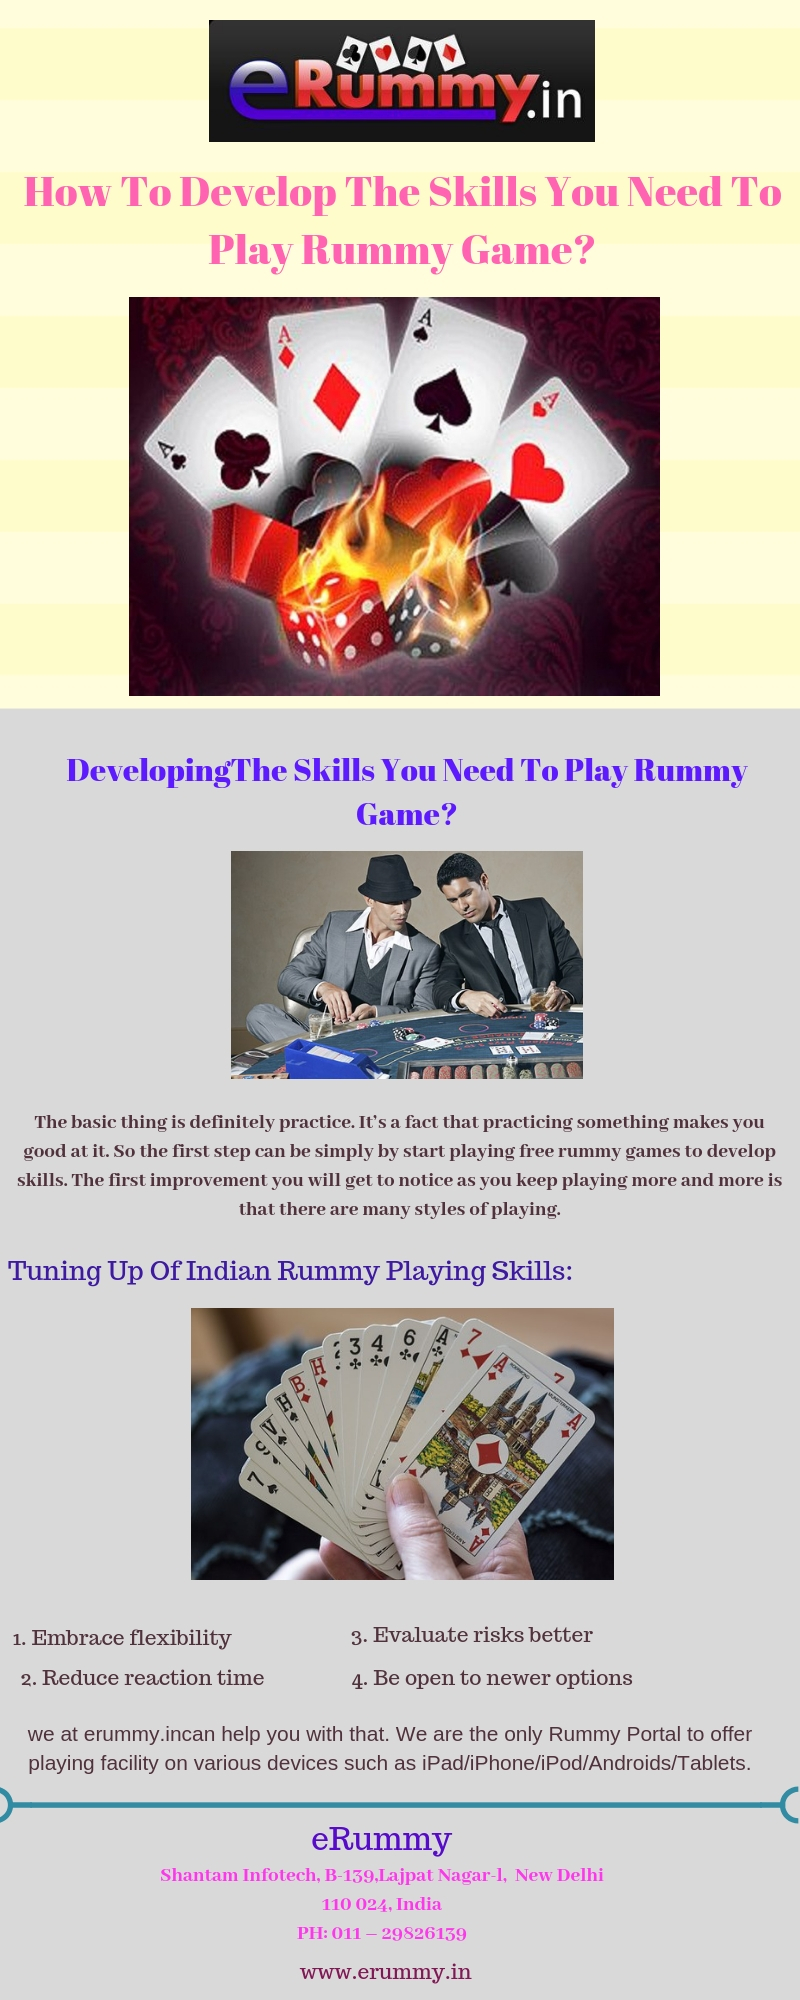 How to develop the skills you need to play rummy game_.jpg Winning a rummy game requires a lot of skill. So how can you develop the basic skill set and revamp it to the advanced level? Find the secrets here! For more details, visit this link: https://bit.ly/2QSGIM9 by Erummy